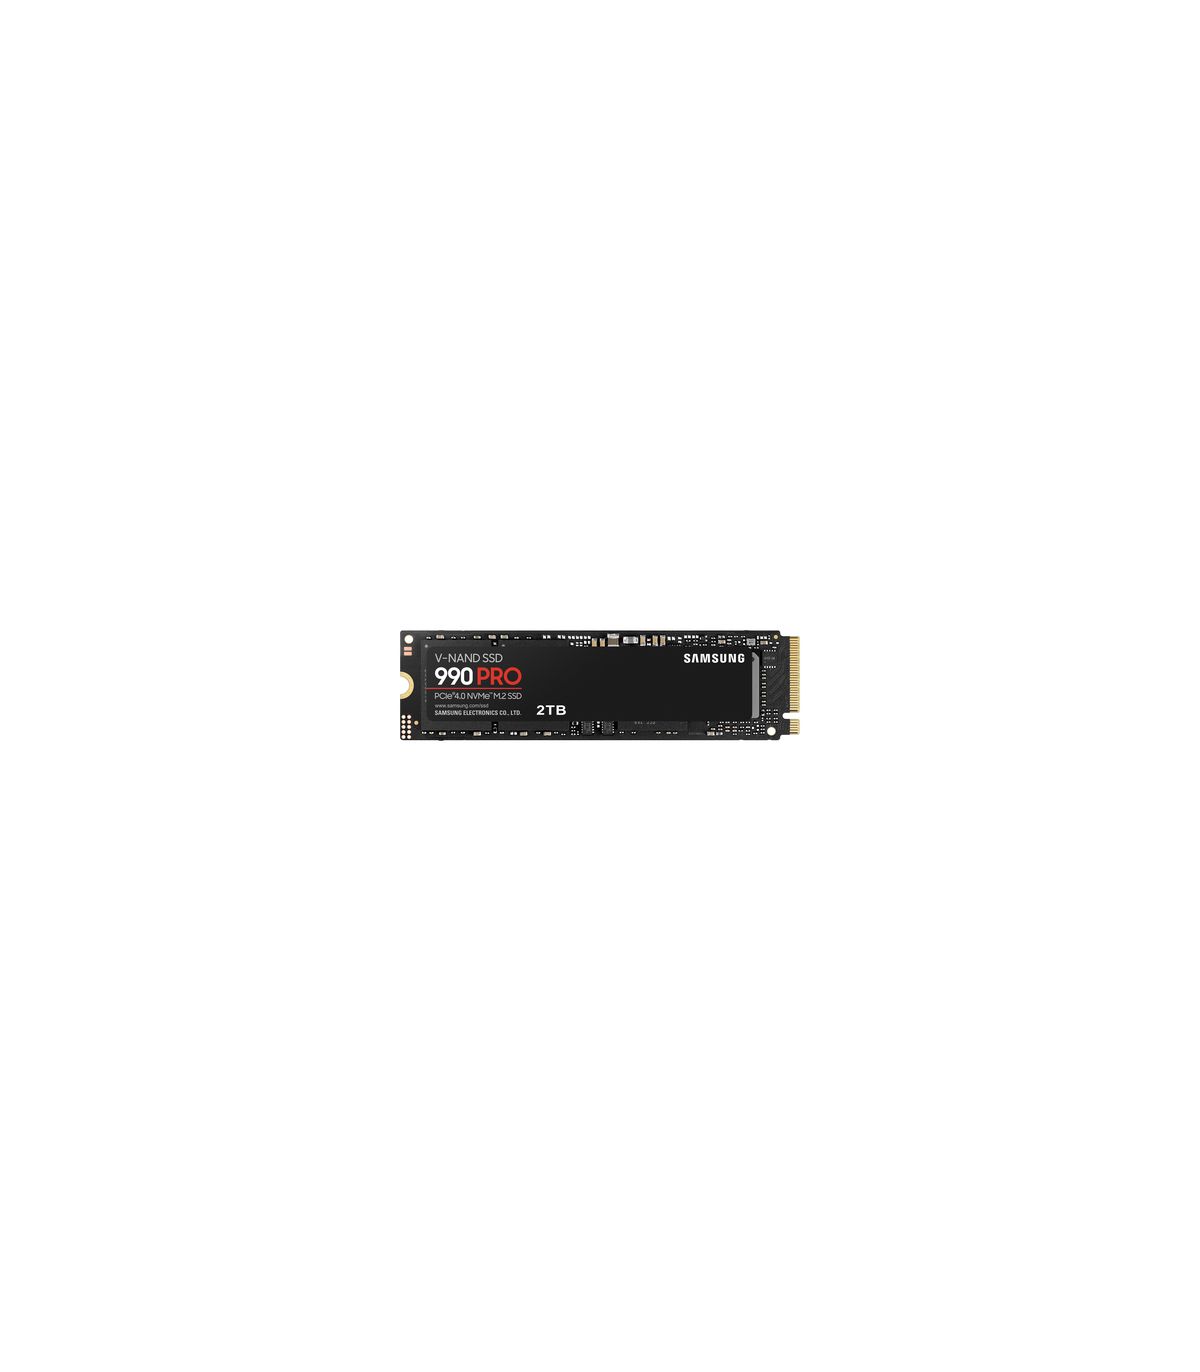 SSD - Samsung 990 PRO 2 To - NVMe M.2 PCIe 4.0